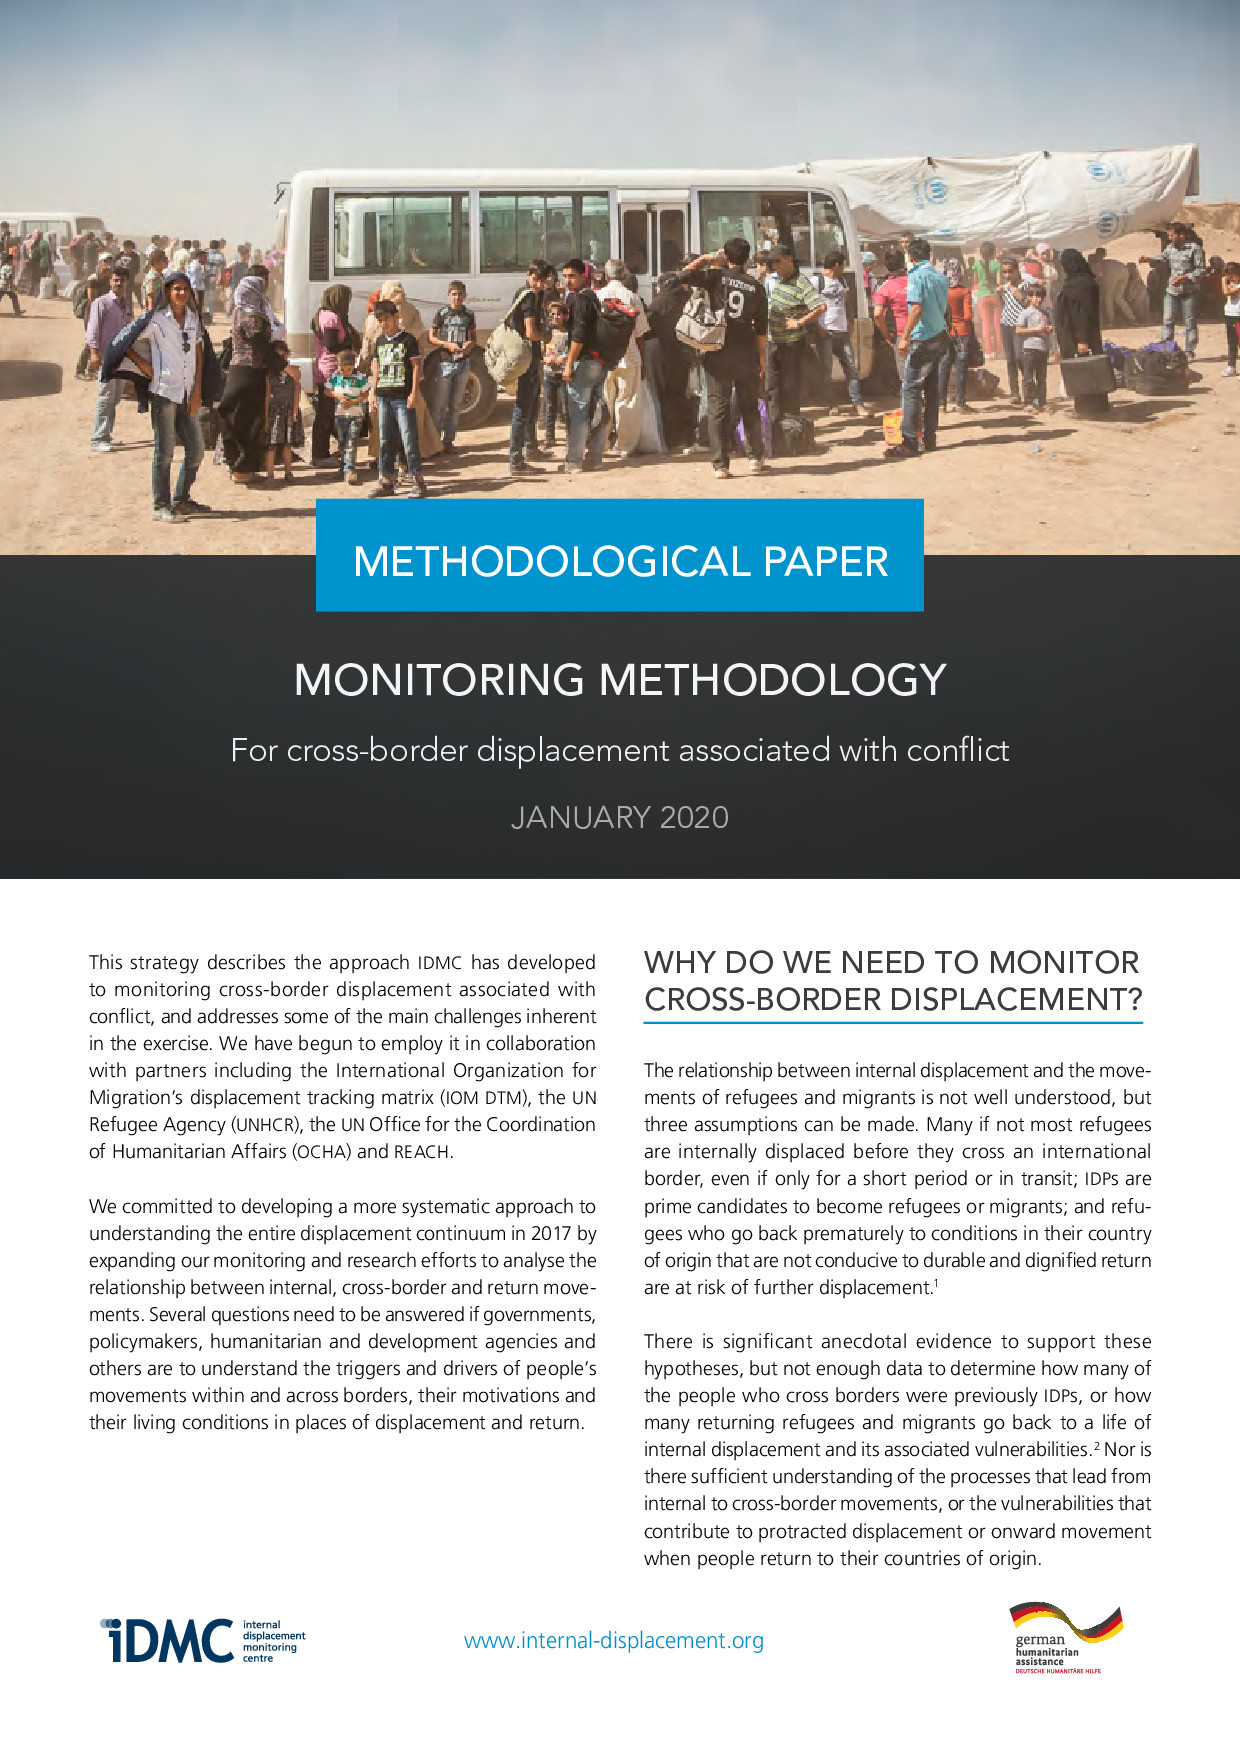 Monitoring methodology for cross-border displacement associated with conflict